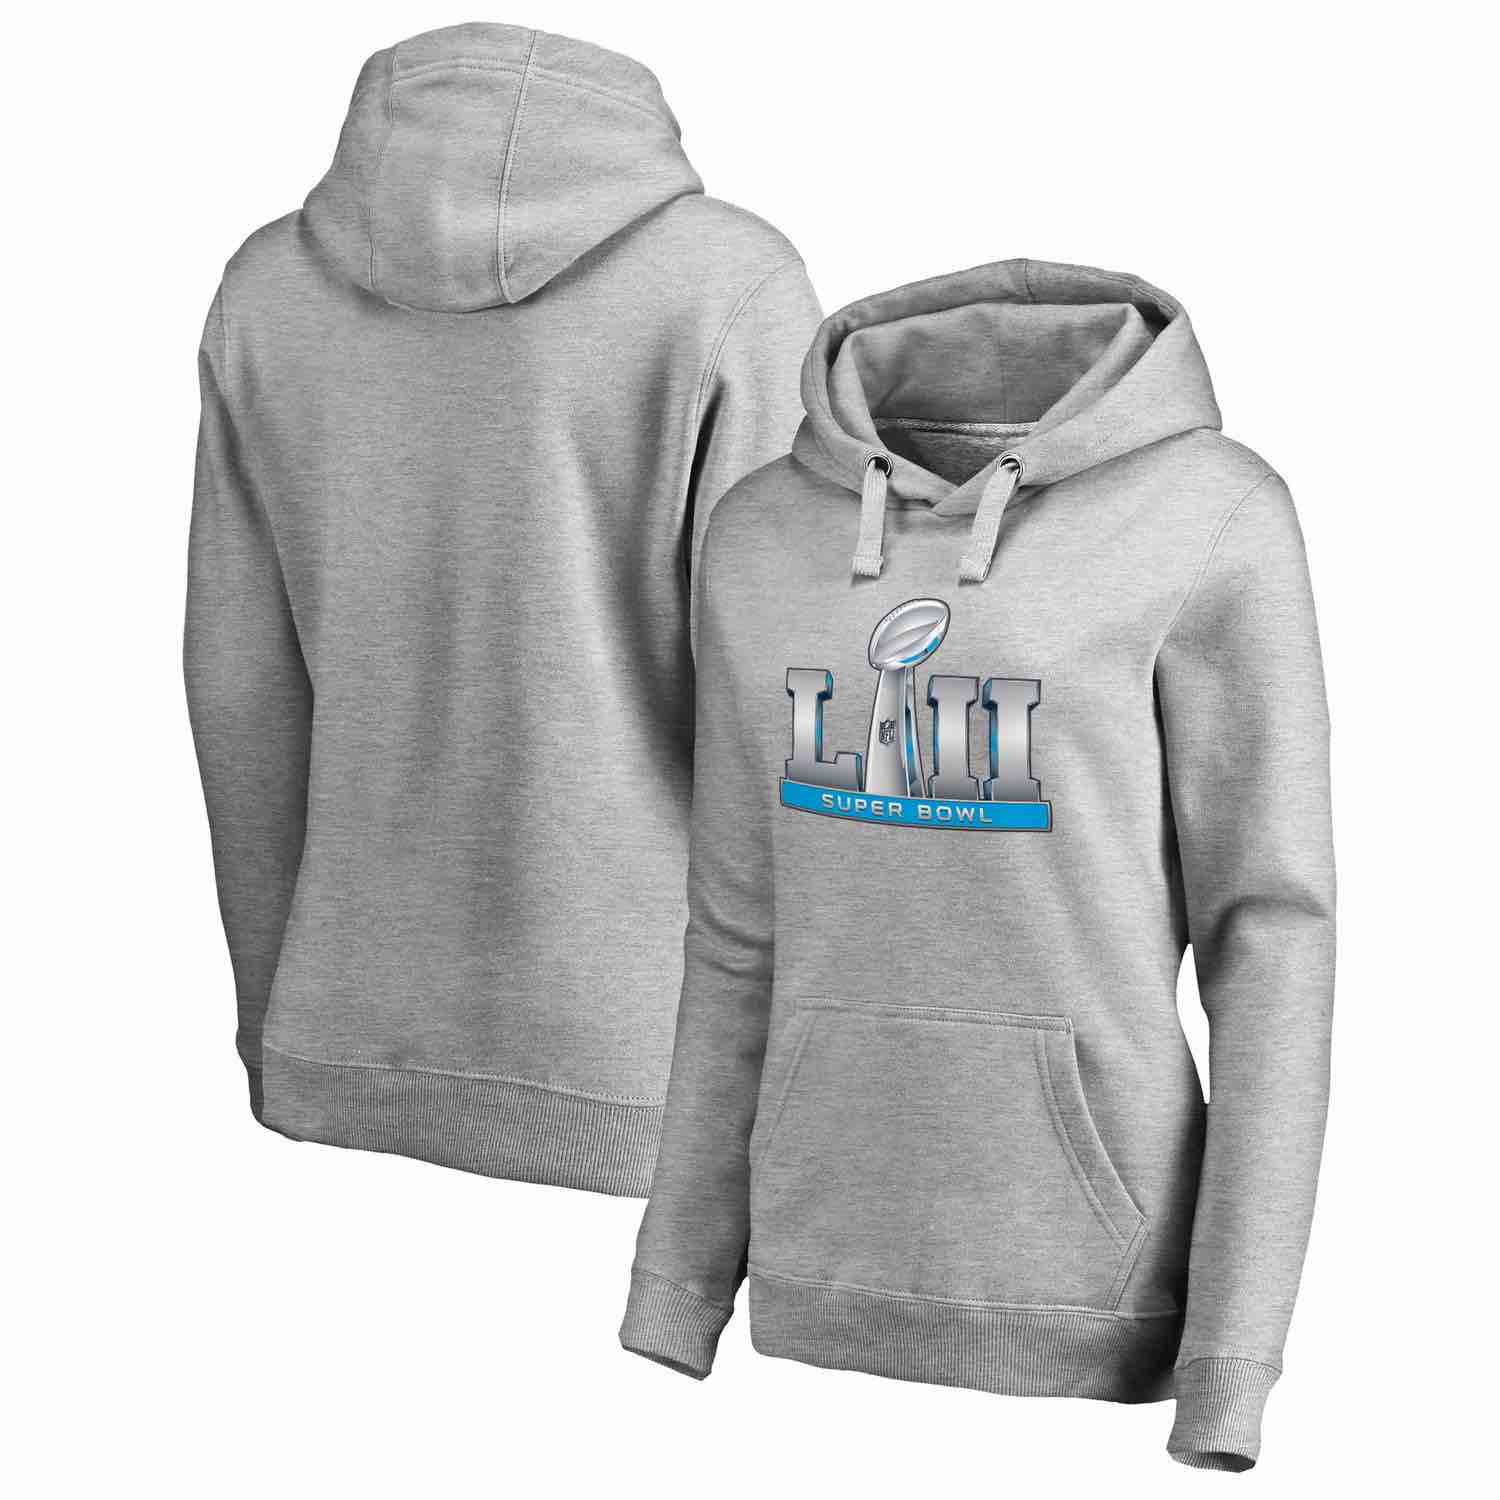 Womens NFL Pro Line by Fanatics Branded Heather Gray Super Bowl LII Event Pullover Hoodie